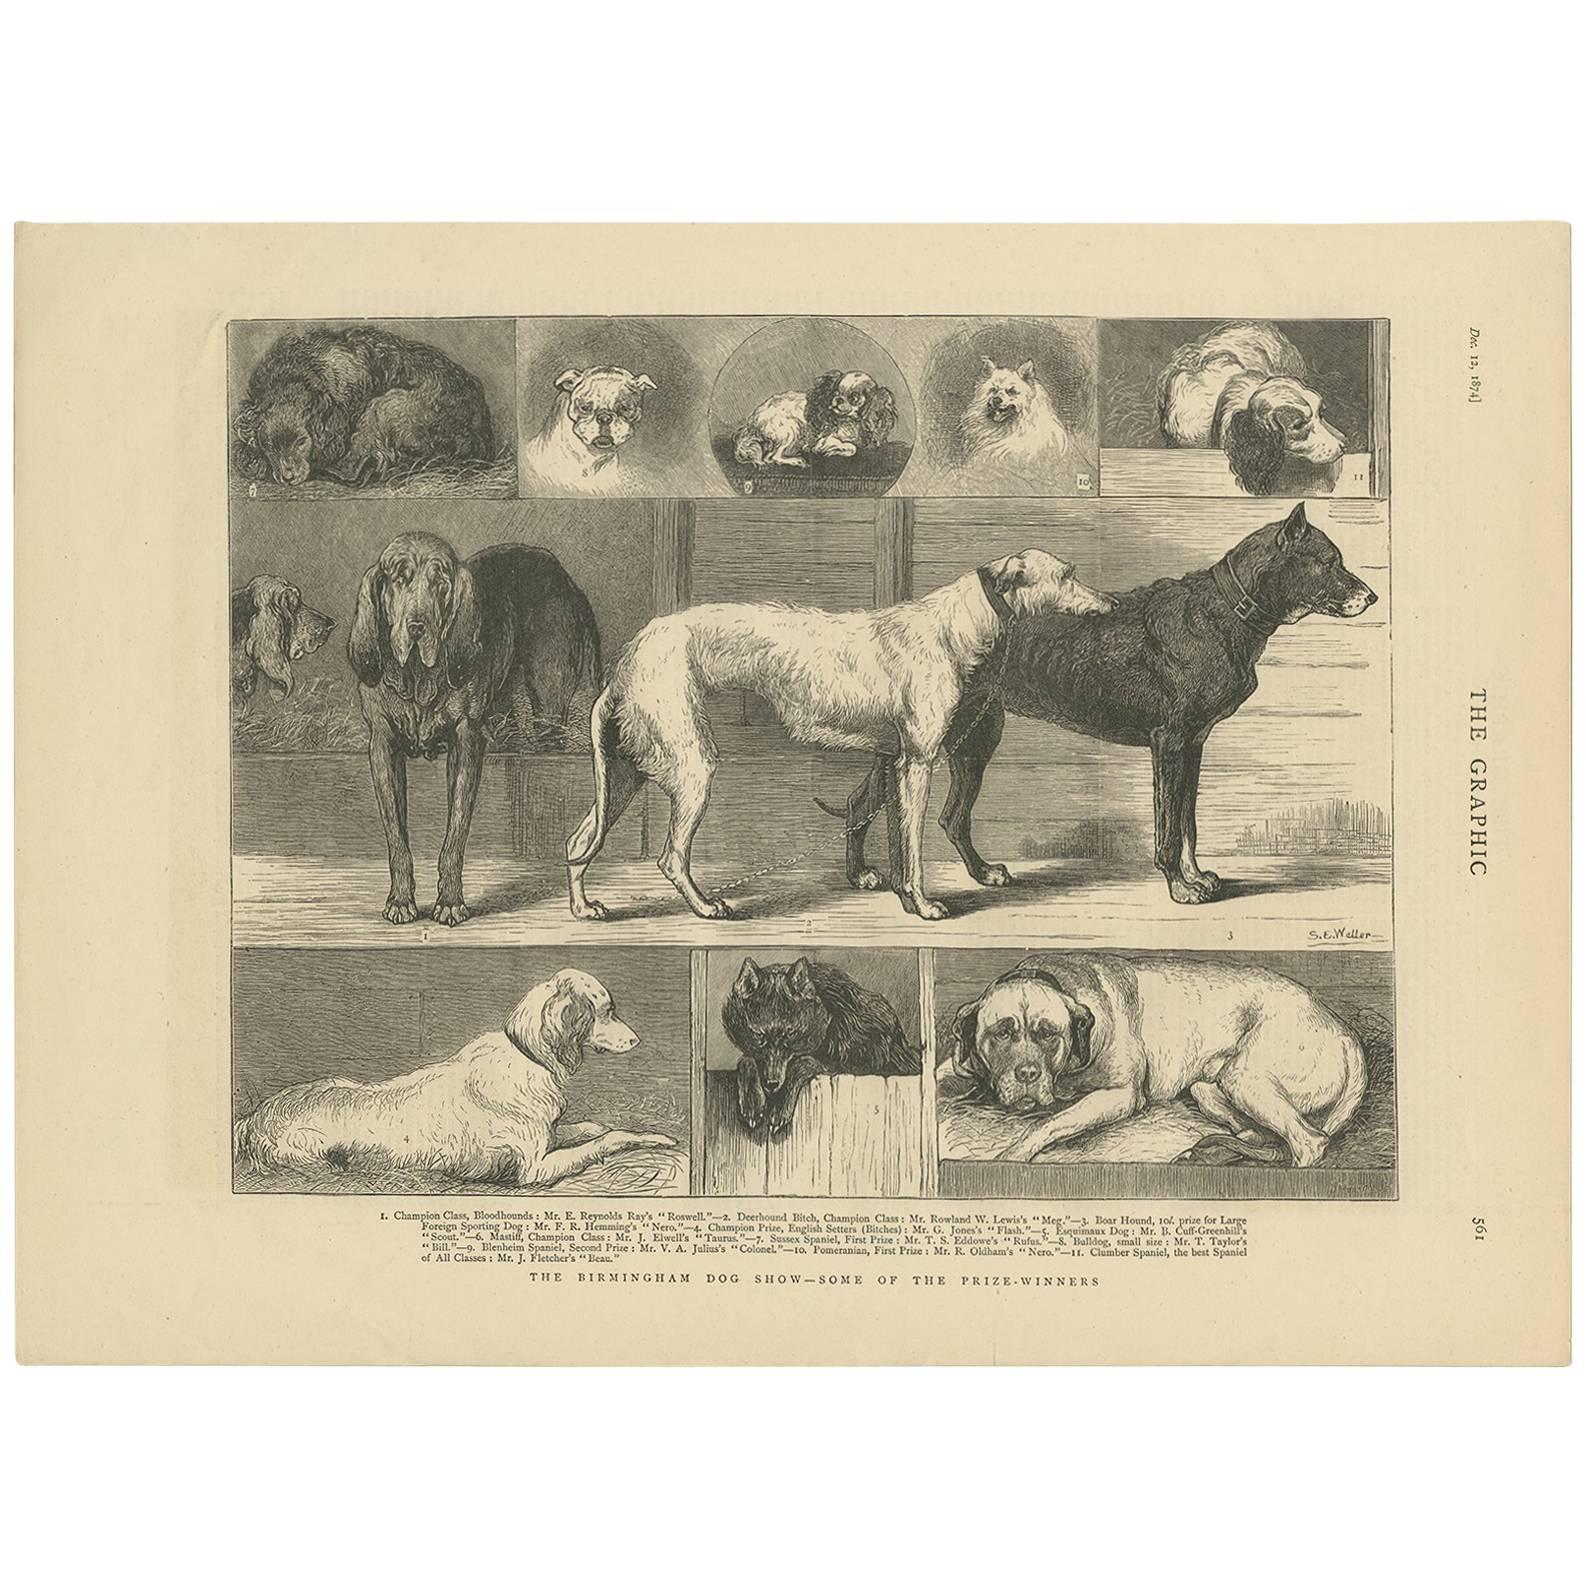 Antique Print of the Birmingham Dog Show by The Graphic, 1874